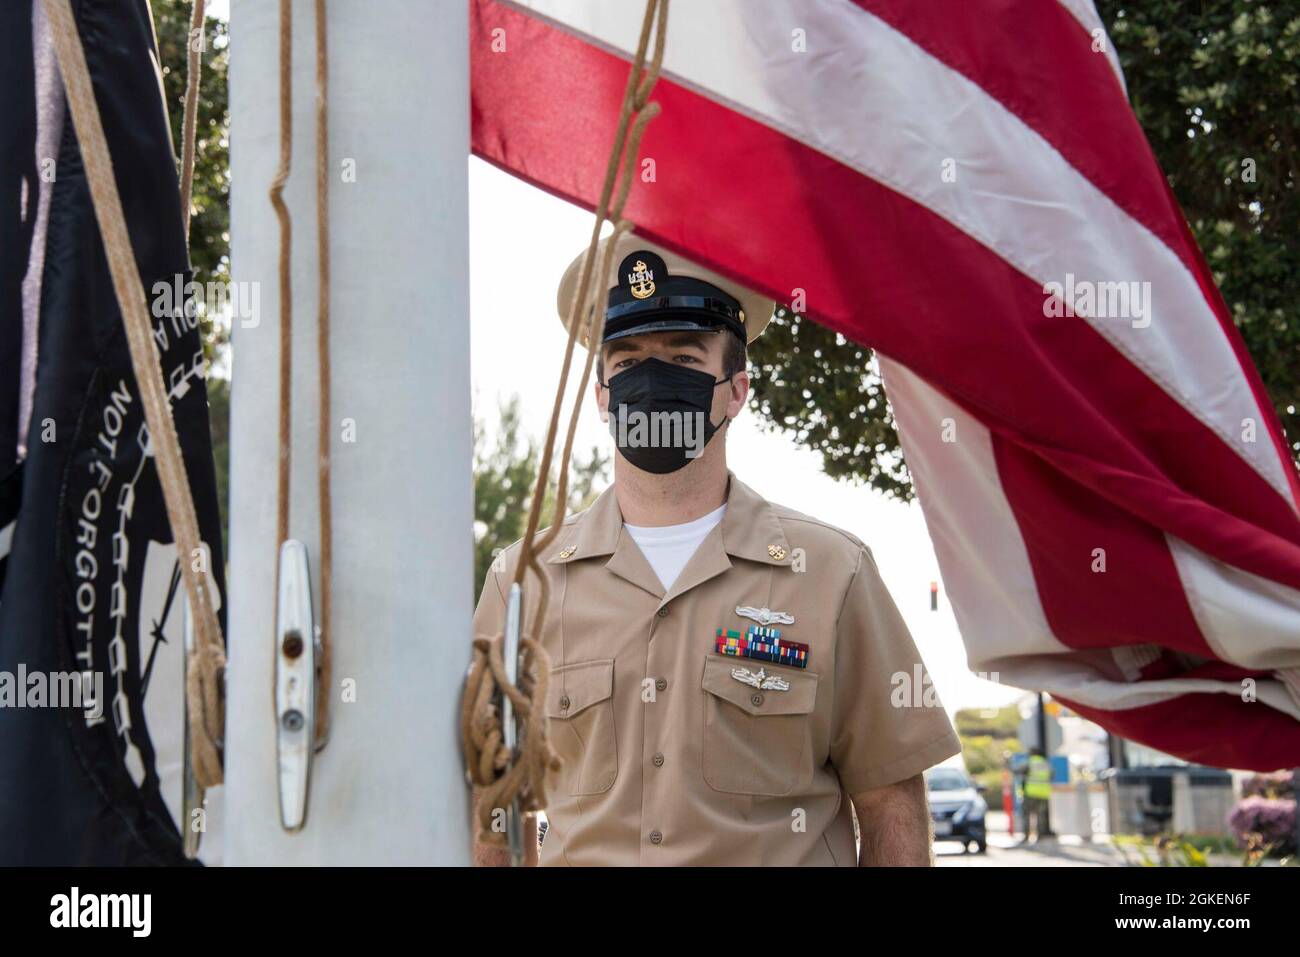 210401-N-BH414-1028 SAN DIEGO (April 1, 2021) Chief Information Technician Brice Stremel assigned to Commander, U.S. 3rd Fleet participates during Morning Colors April 1, 2021. This year marks the 128th anniversary of the chief petty officer rank. Stock Photo